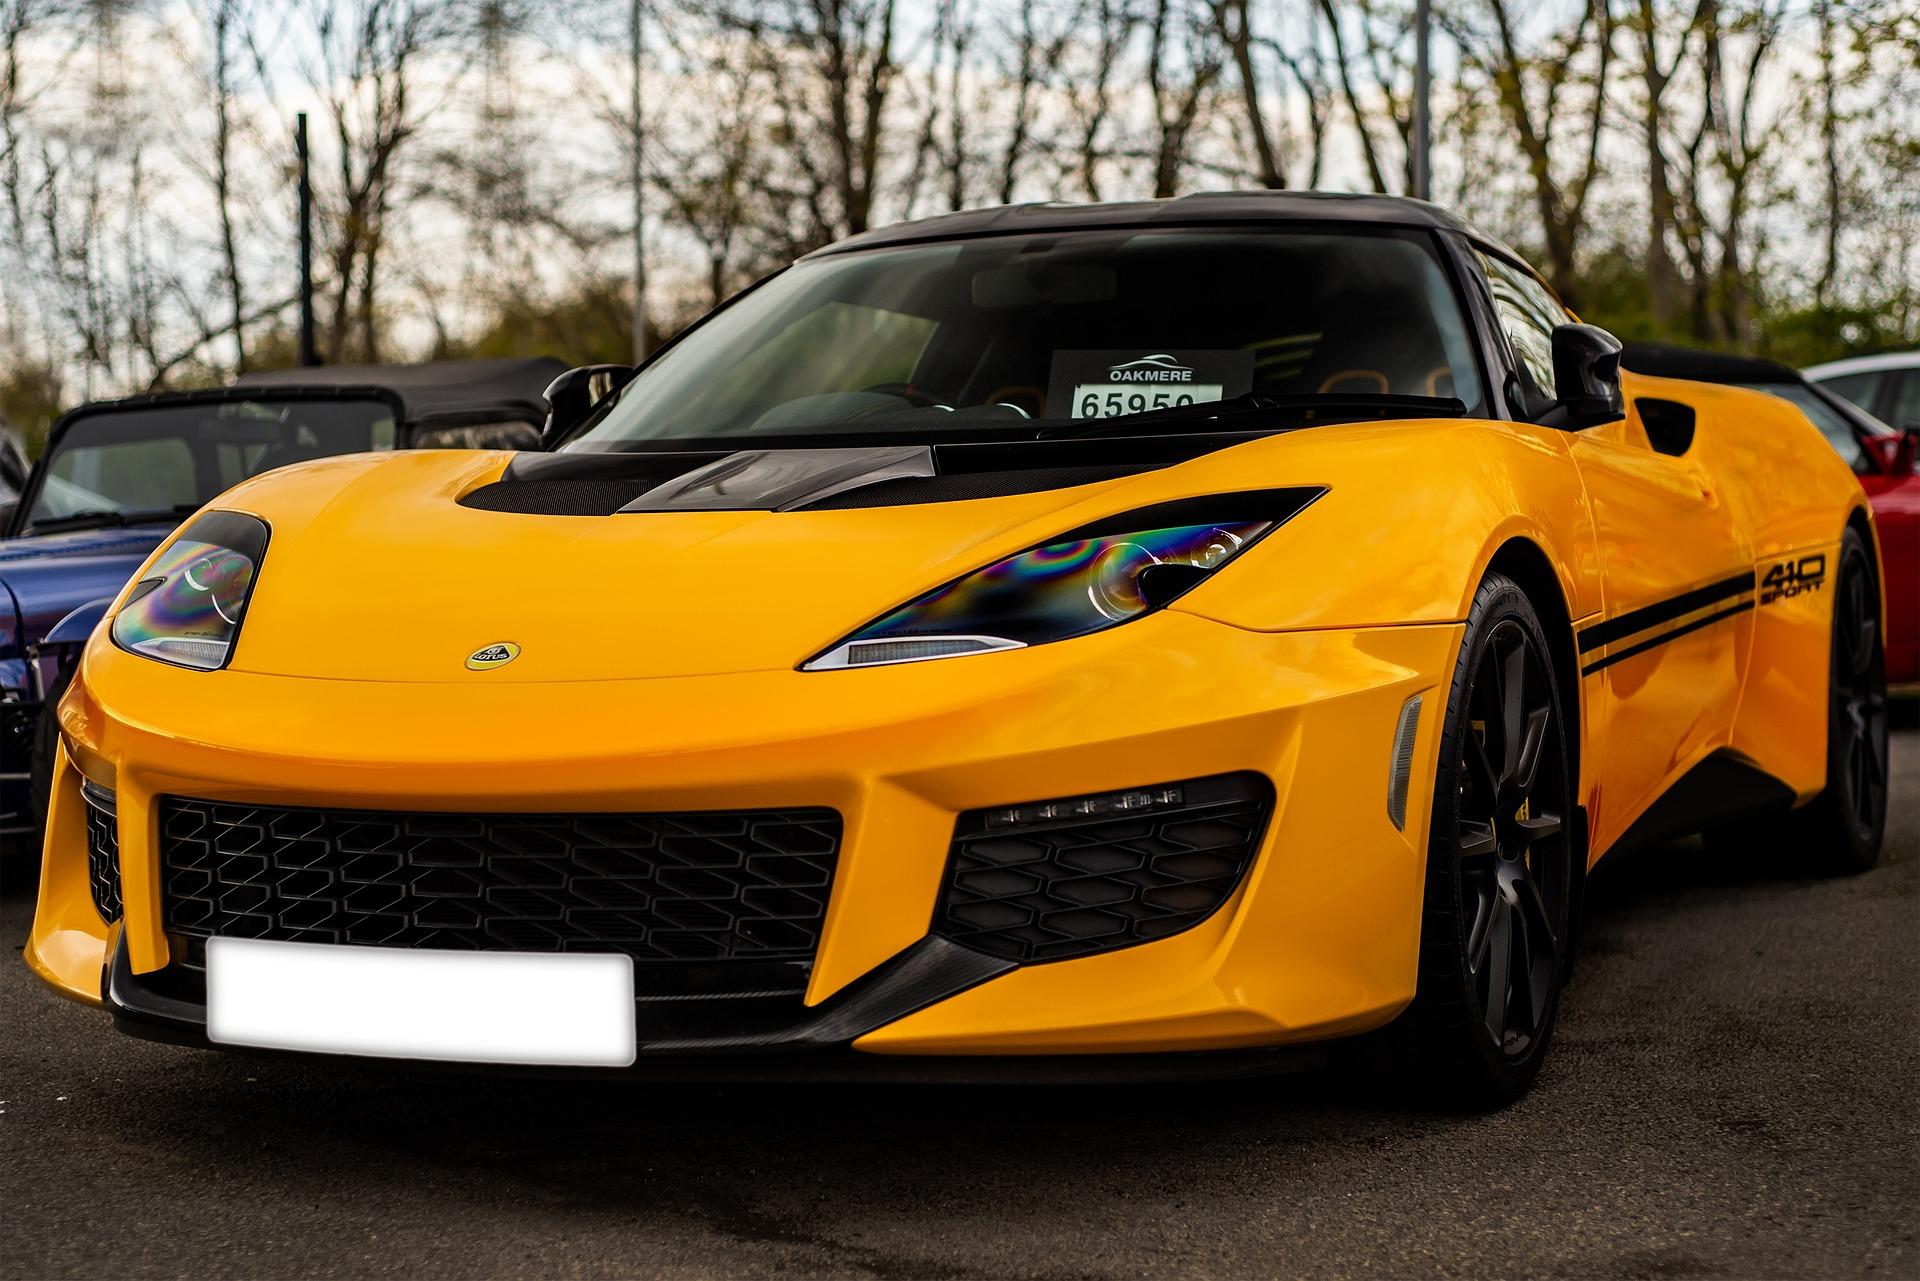 The futuristic Lotus Evora can top out at 188 mph with a 3.5L V6 engine.